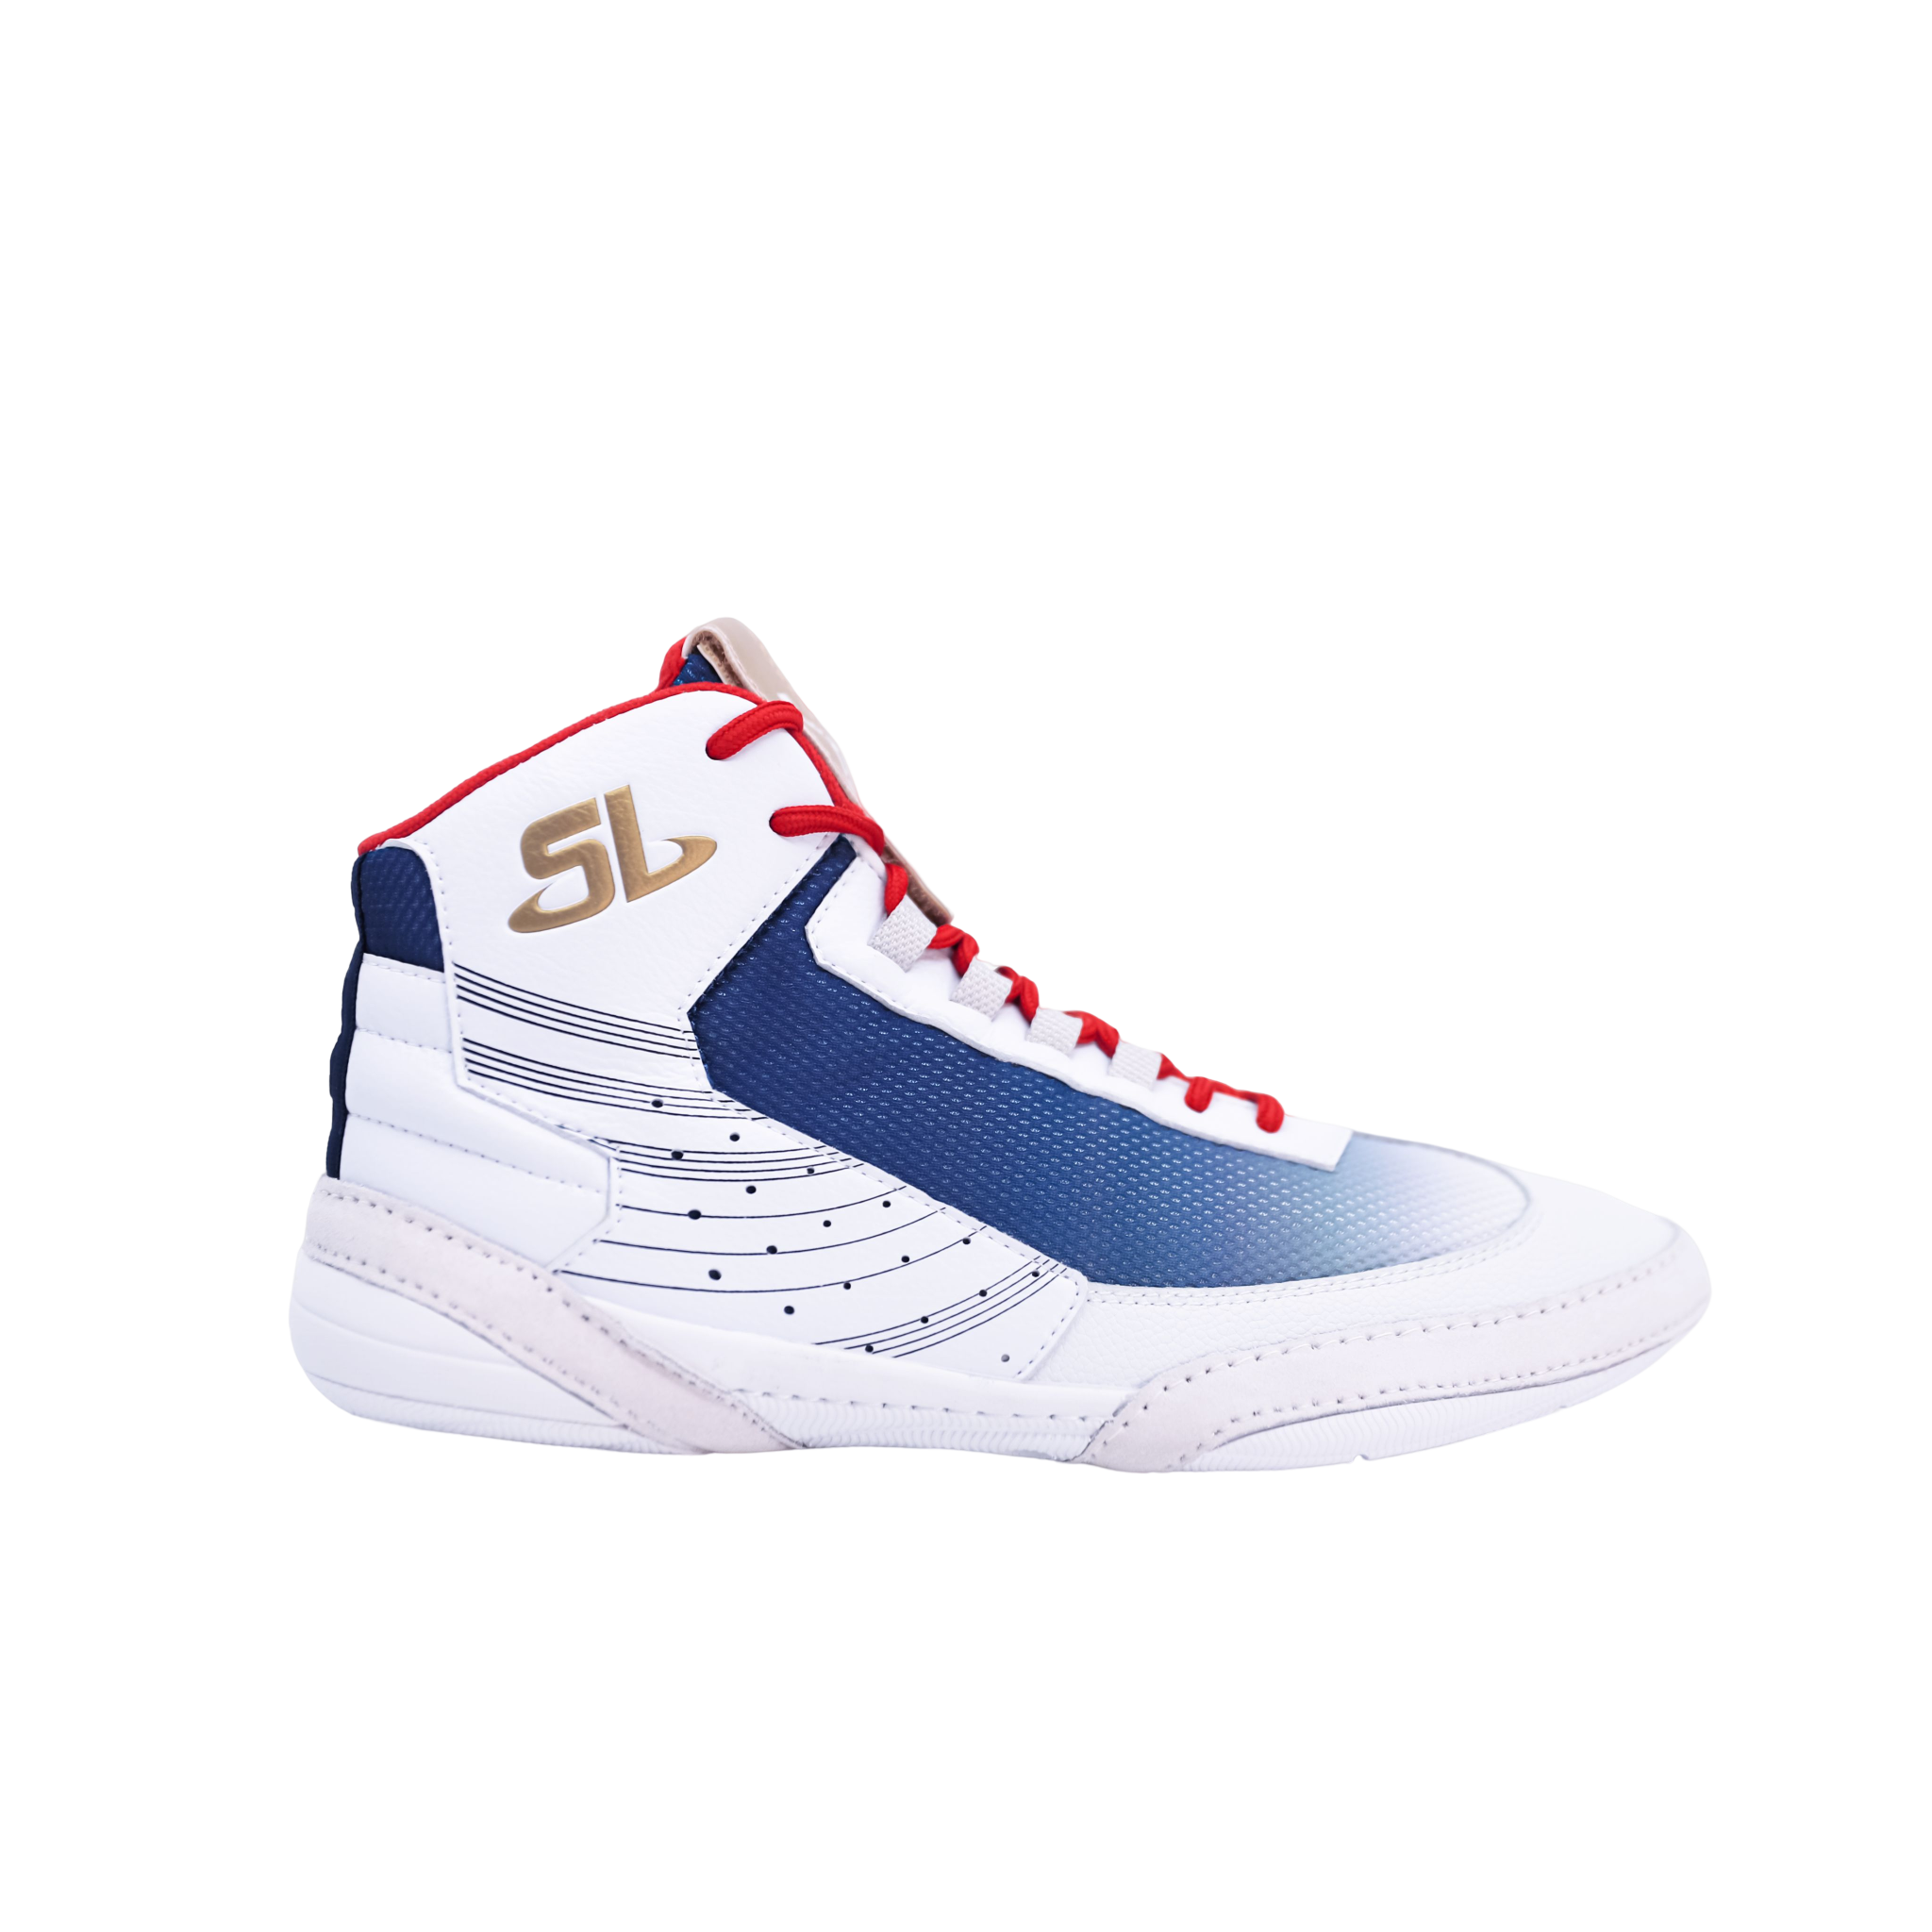 Ascend One - Limited Edition - David Taylor Signature Model -  White/Red/Blue